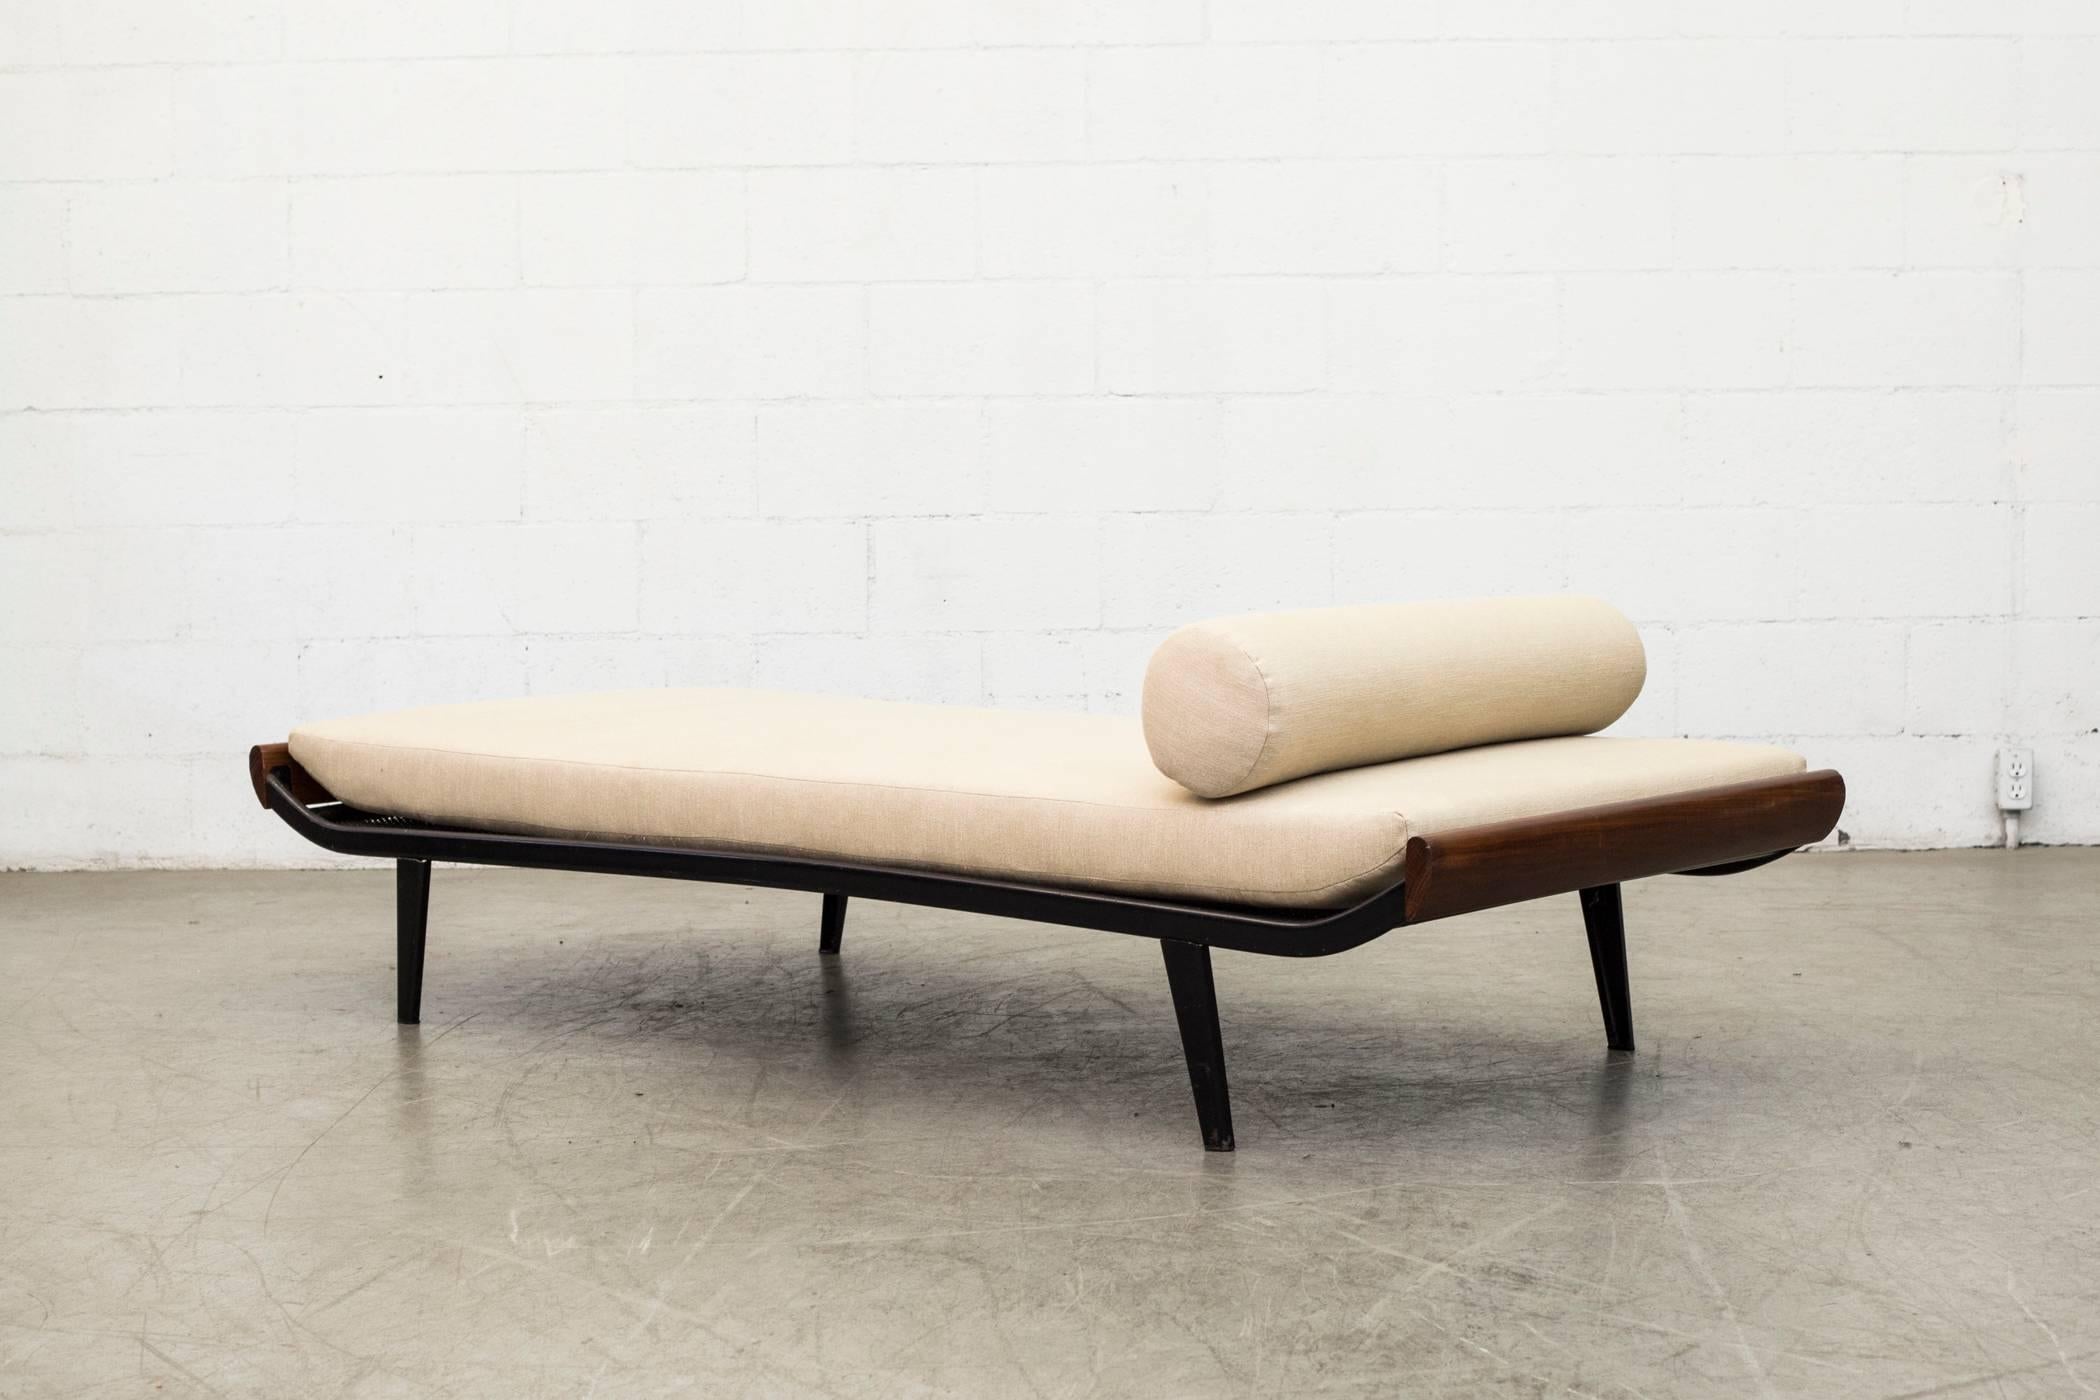 1960s Cleopatra daybed by A.R. Cordemeyer. Teak wood ends with enameled dark grey metal frame and 